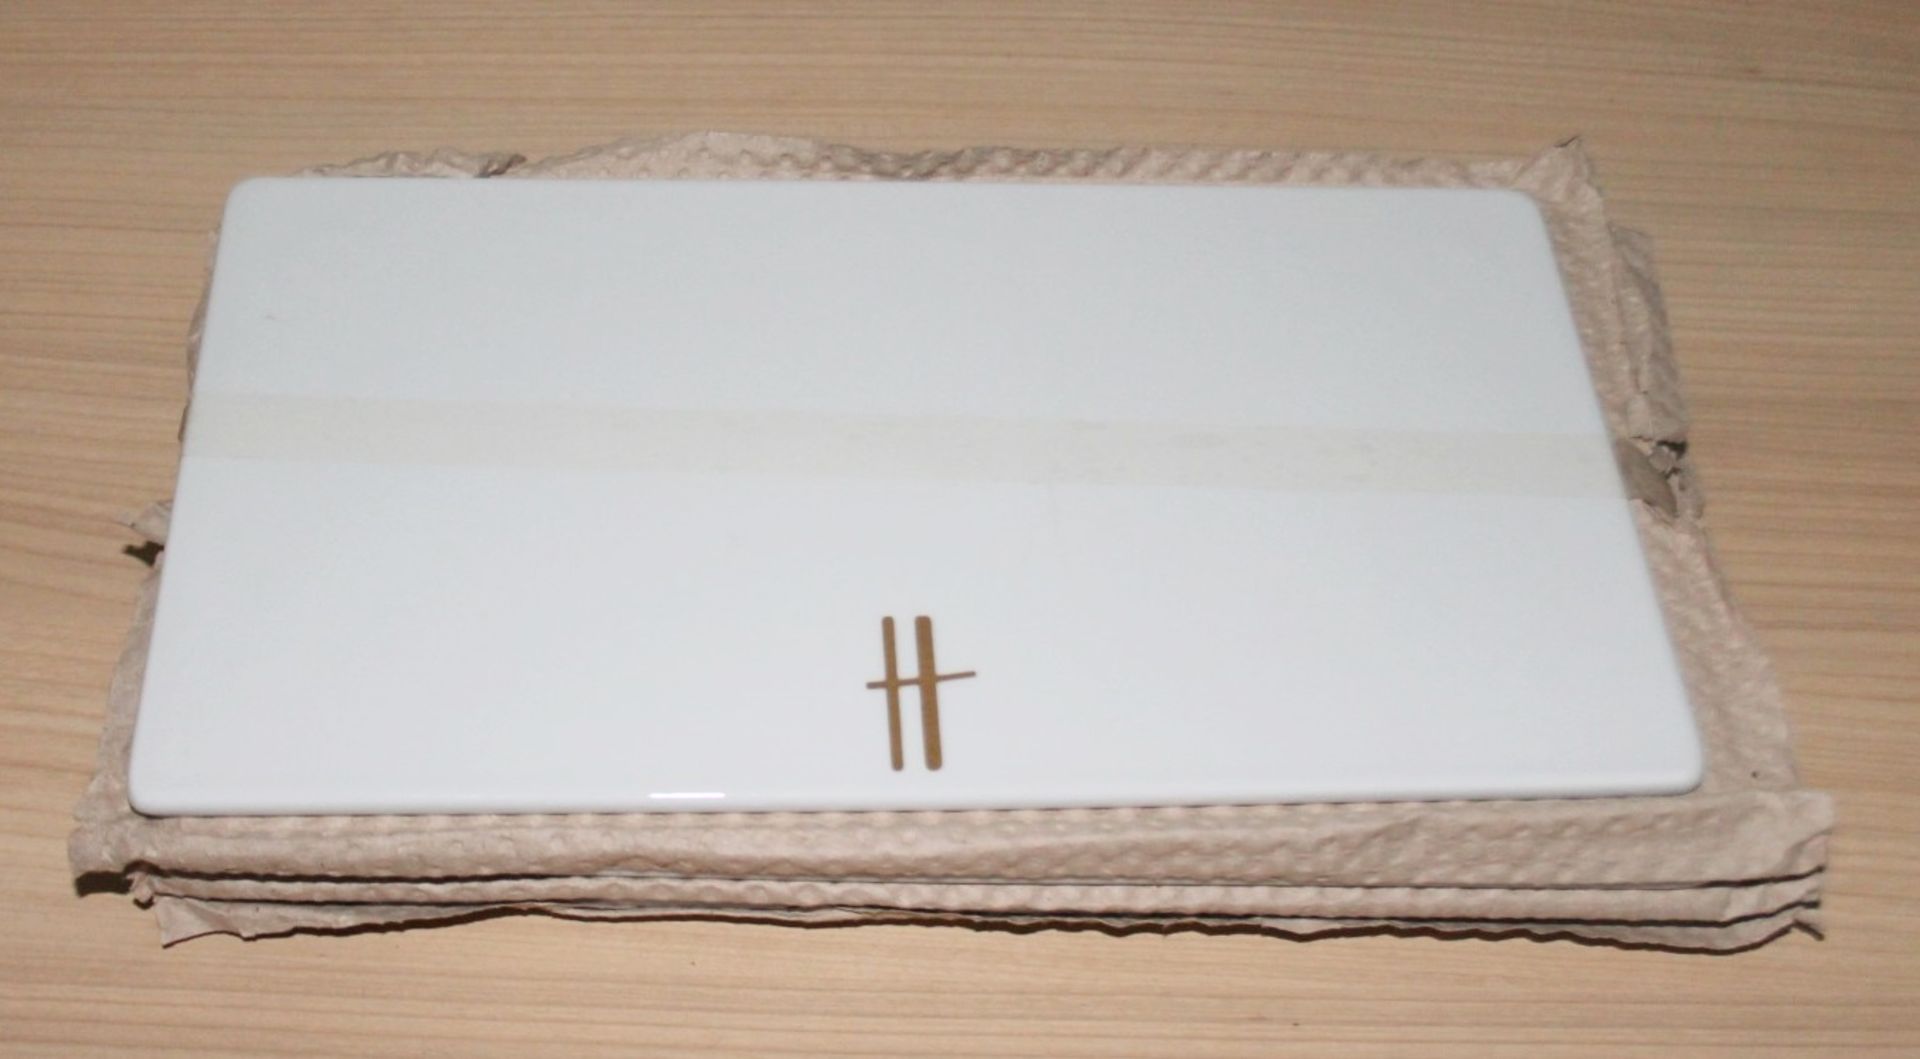 12 x PILLIVUYT Porcelain Rectangular Serving Trays In White Featuring 'Famous Branding' In Gold - - Image 3 of 7